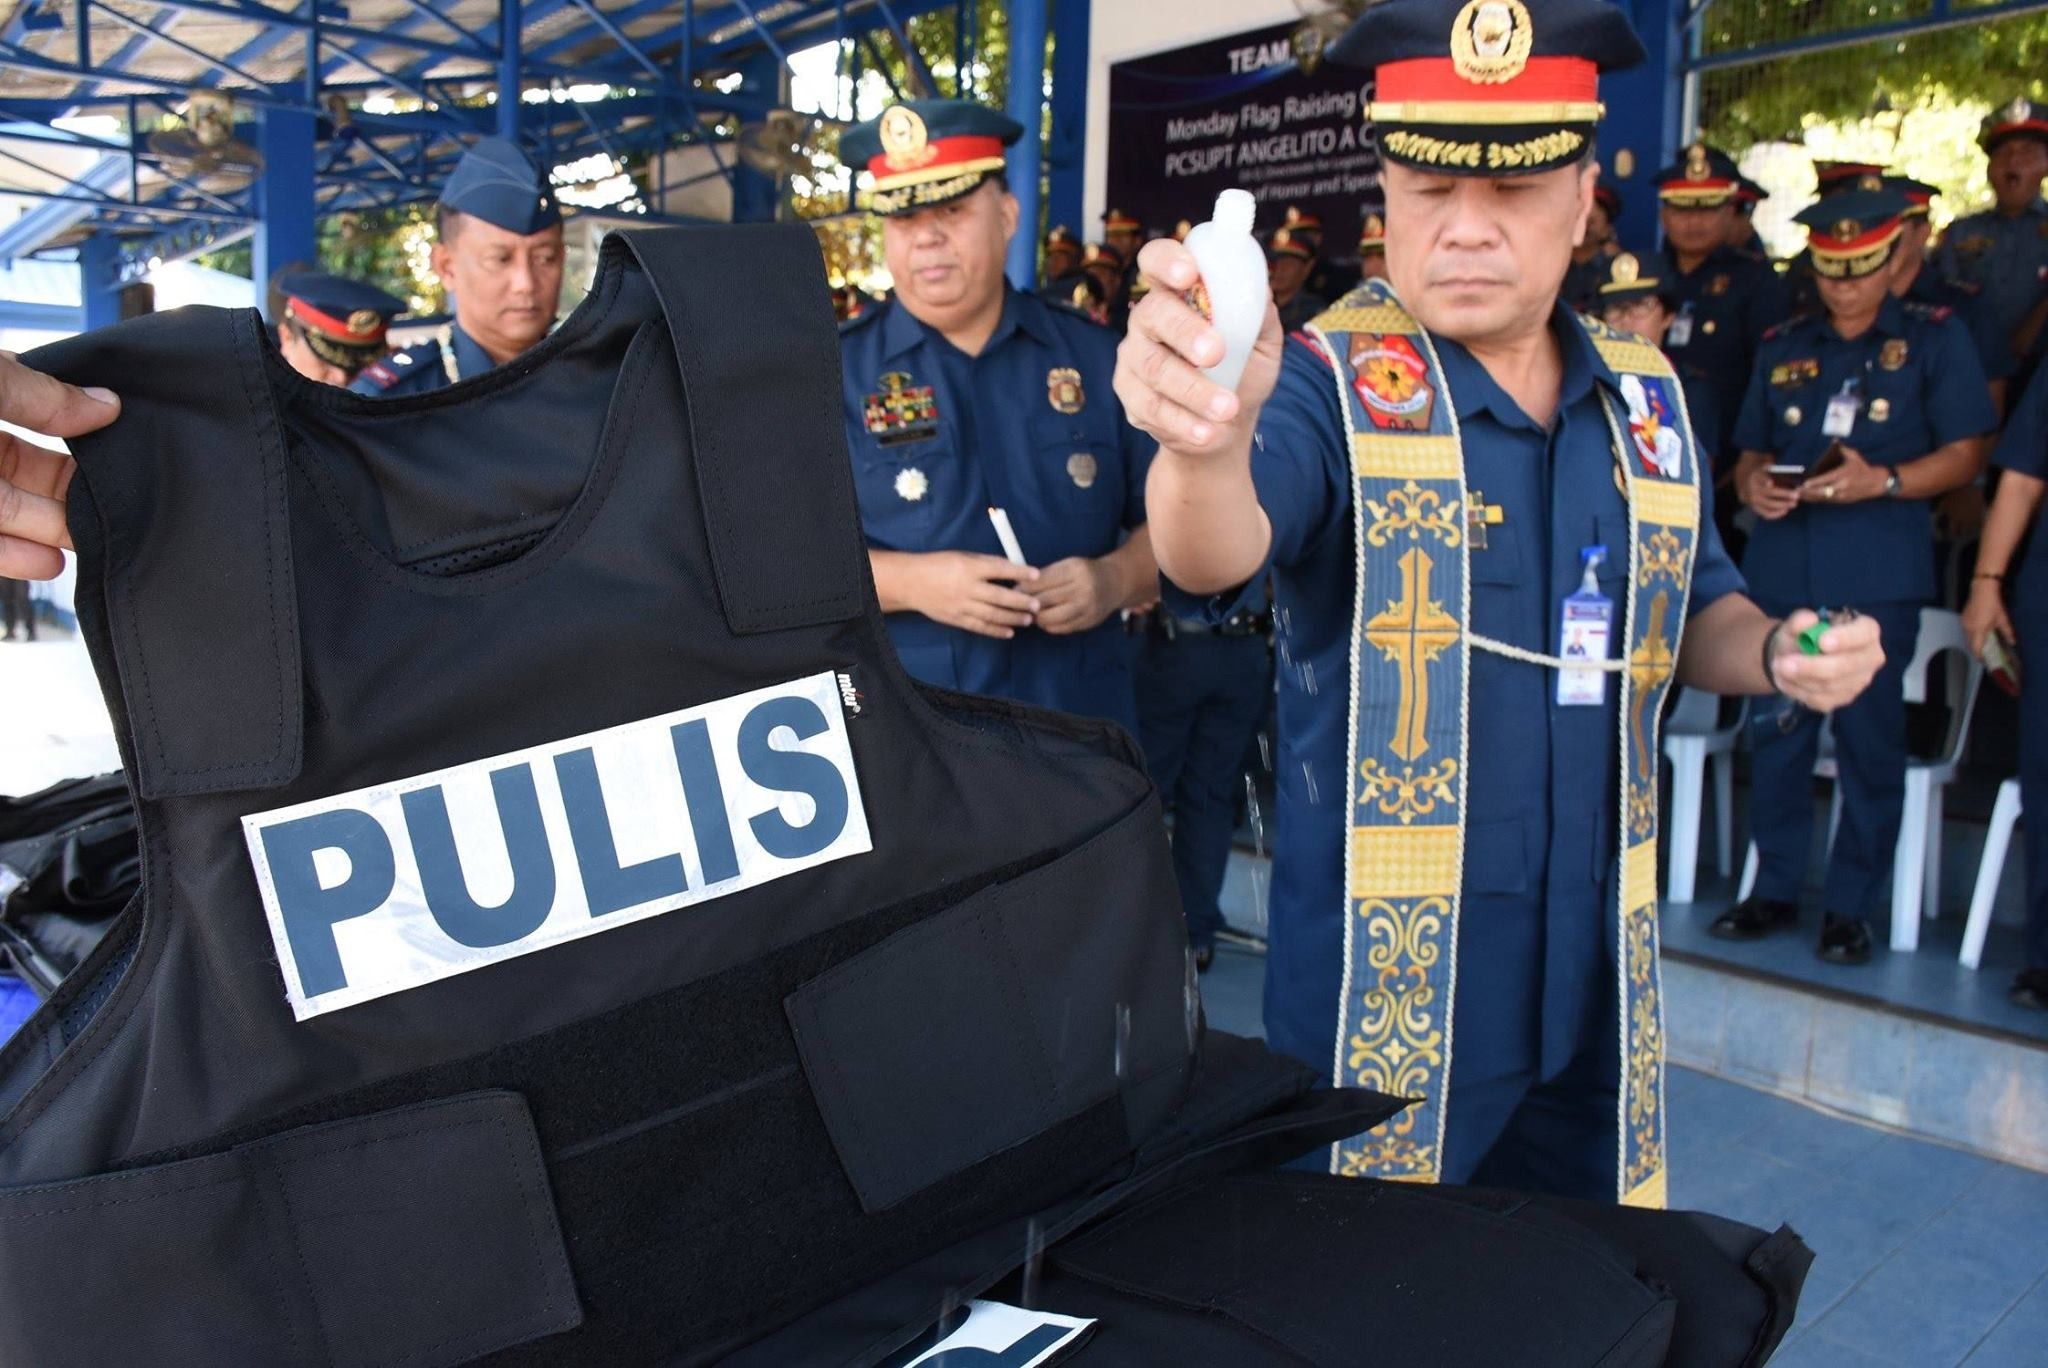 Vests, other equipment given to police offices